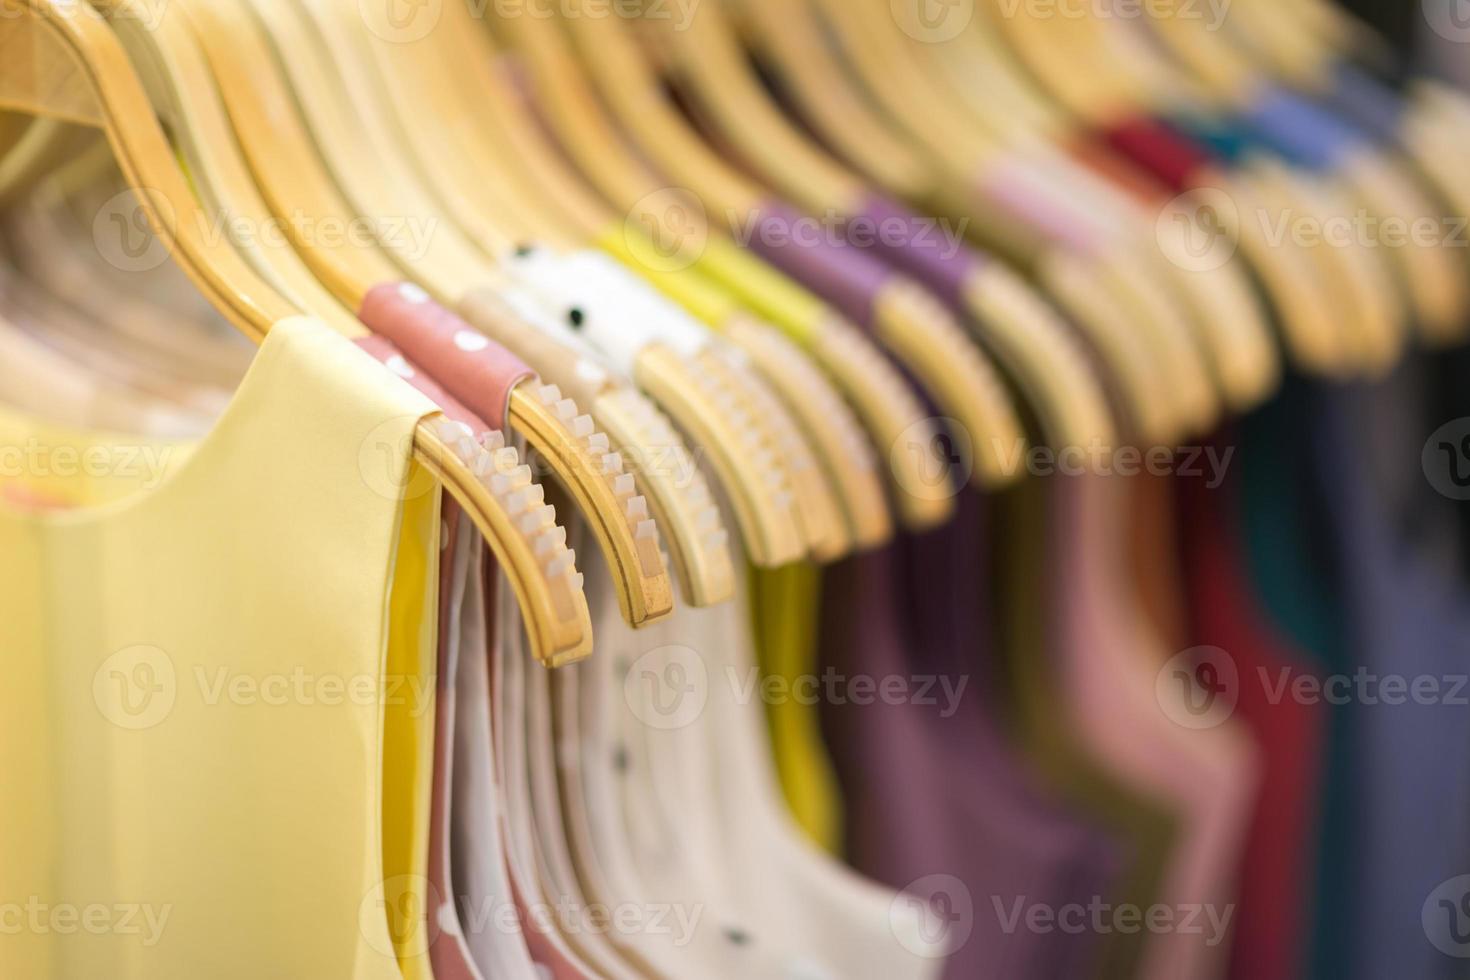 Clothes that are arranged on shelves and hangers photo